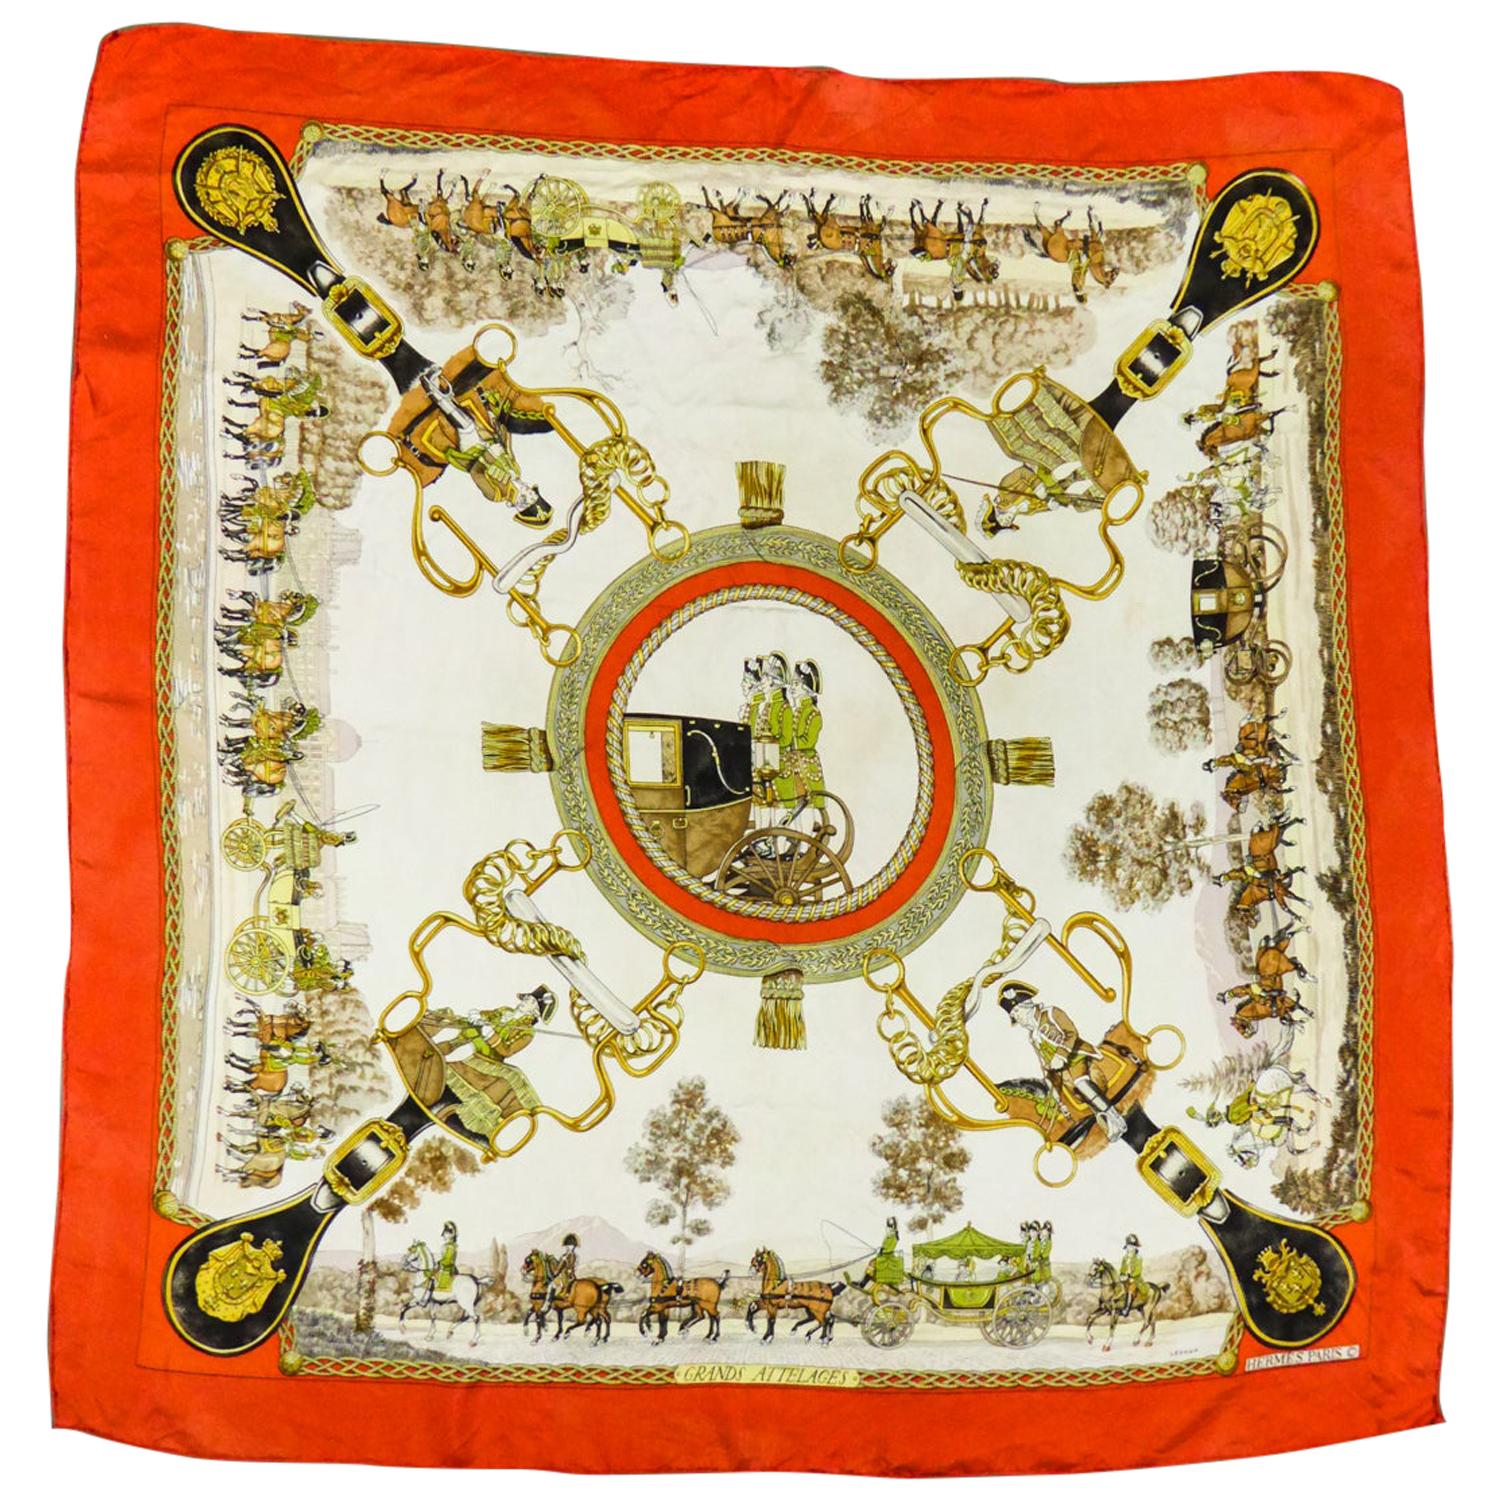 Hermès Carré or Scarf "Grands Attelages" by Philippe Ledoux Circa 1972